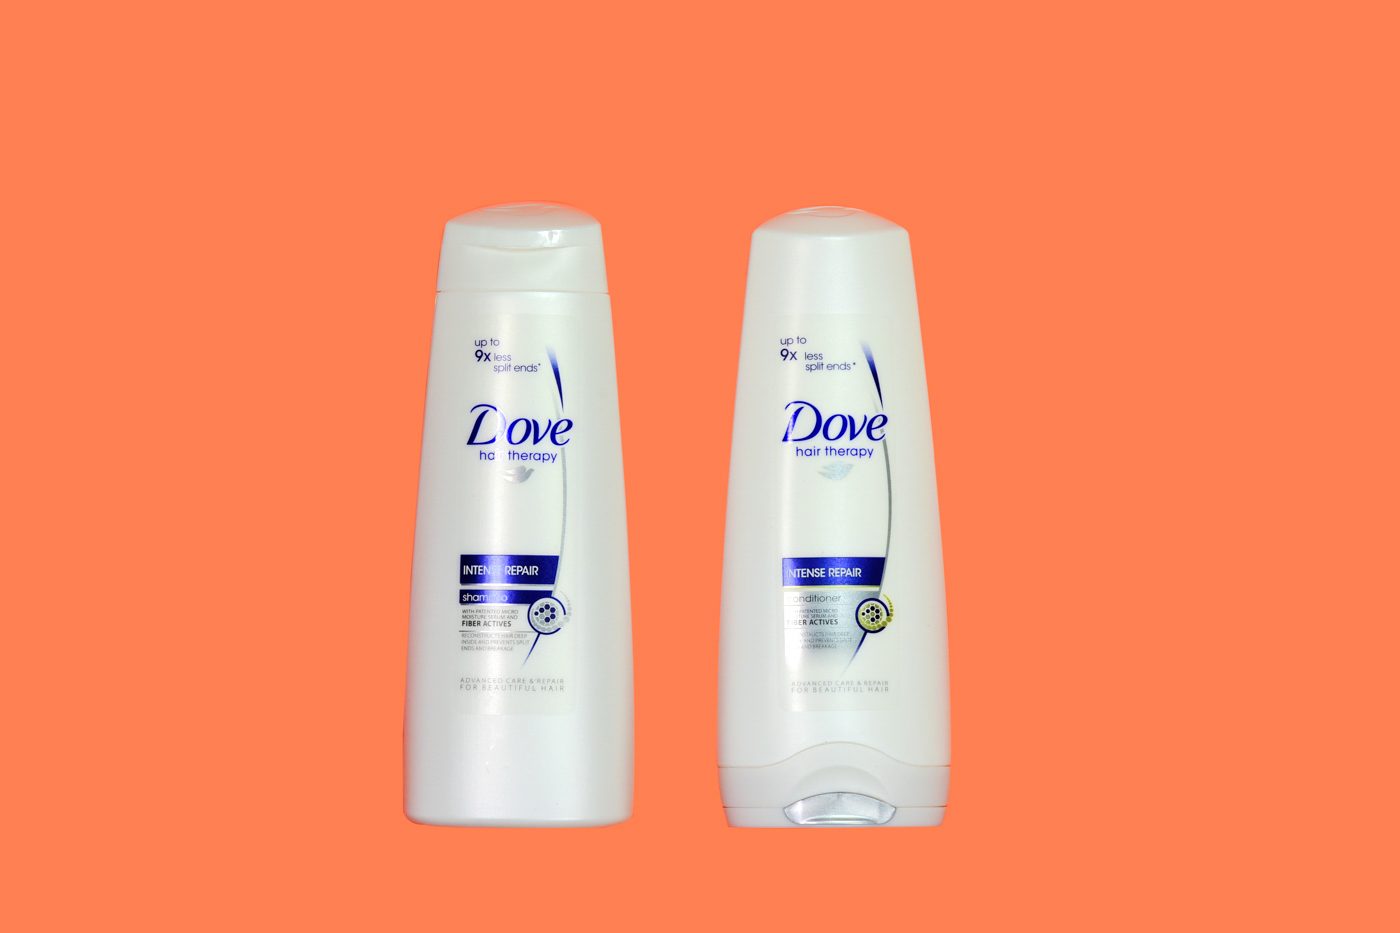  Dove Intense Repair shampoo (P166.85 for 350 ml) and conditioner (P207 for 335 ml) from Lazada.com.ph. Photo by Alecs Ongcal/Rappler